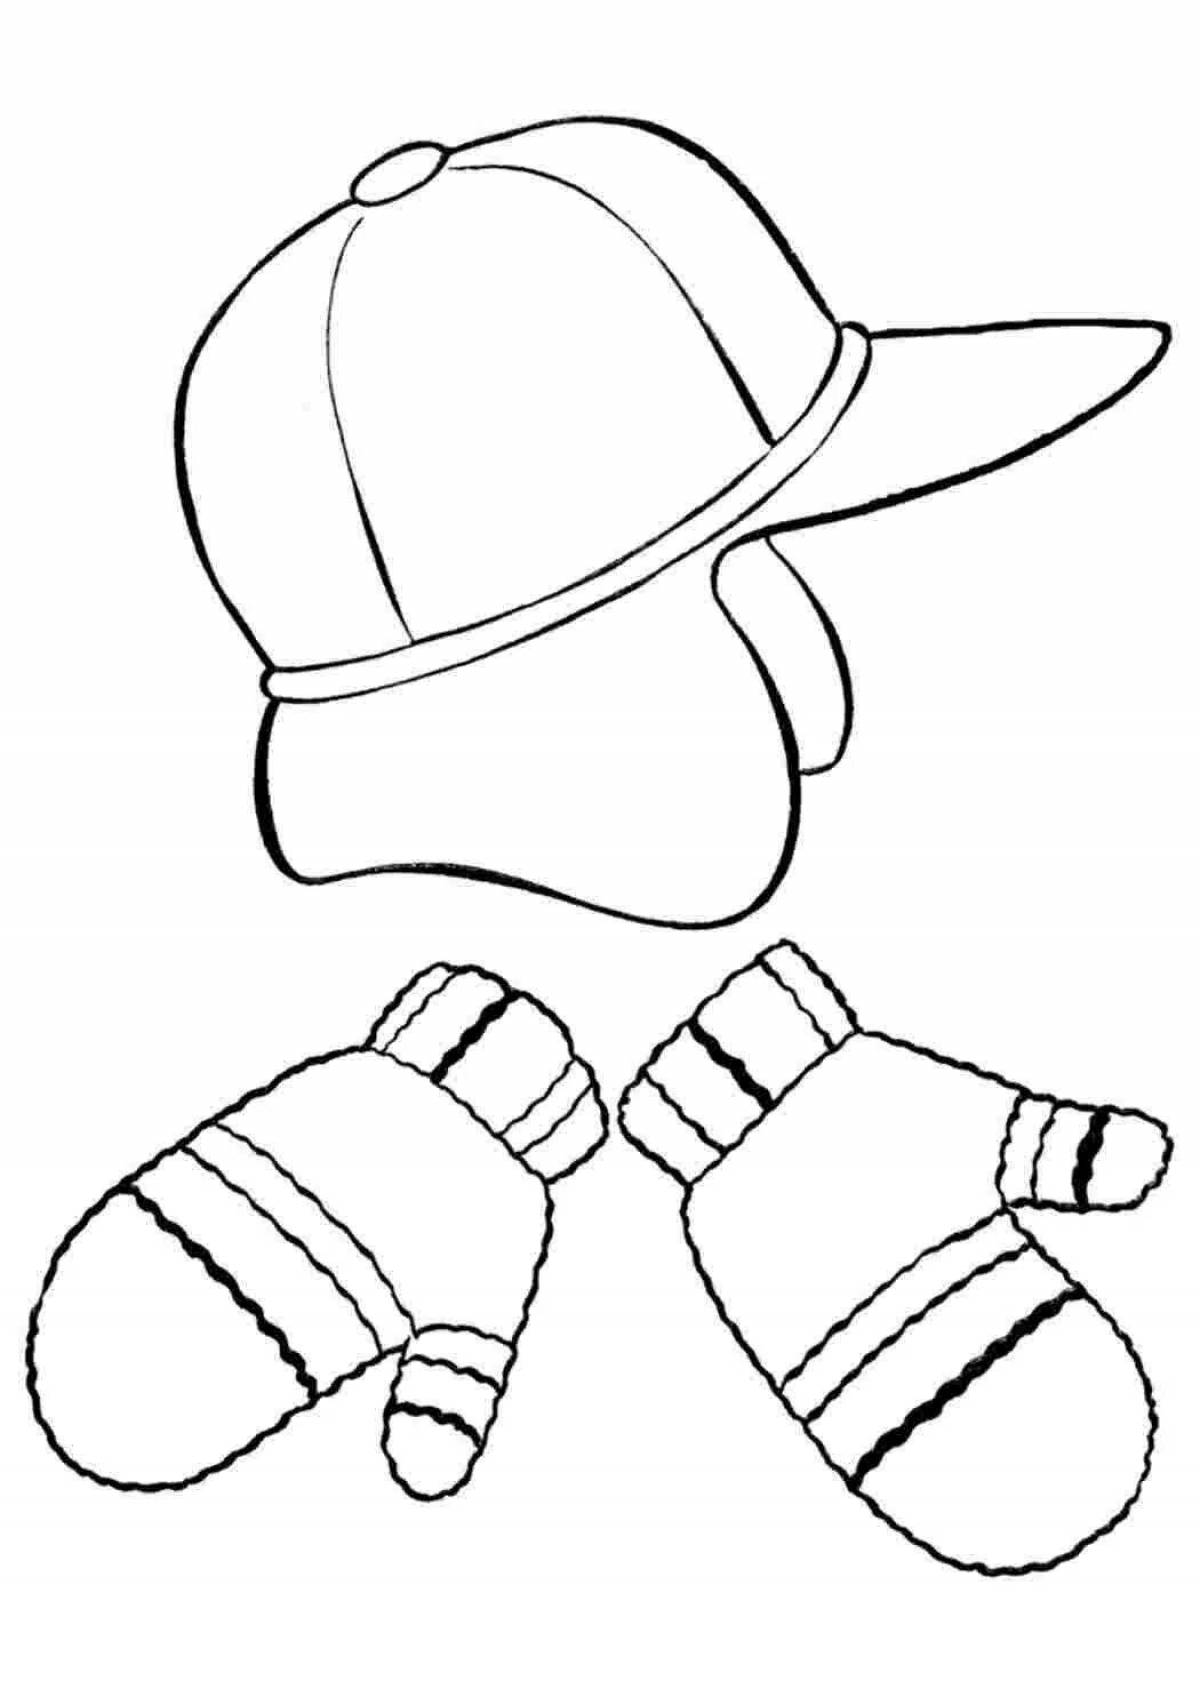 Coloring page great cap for kids 2-3 years old